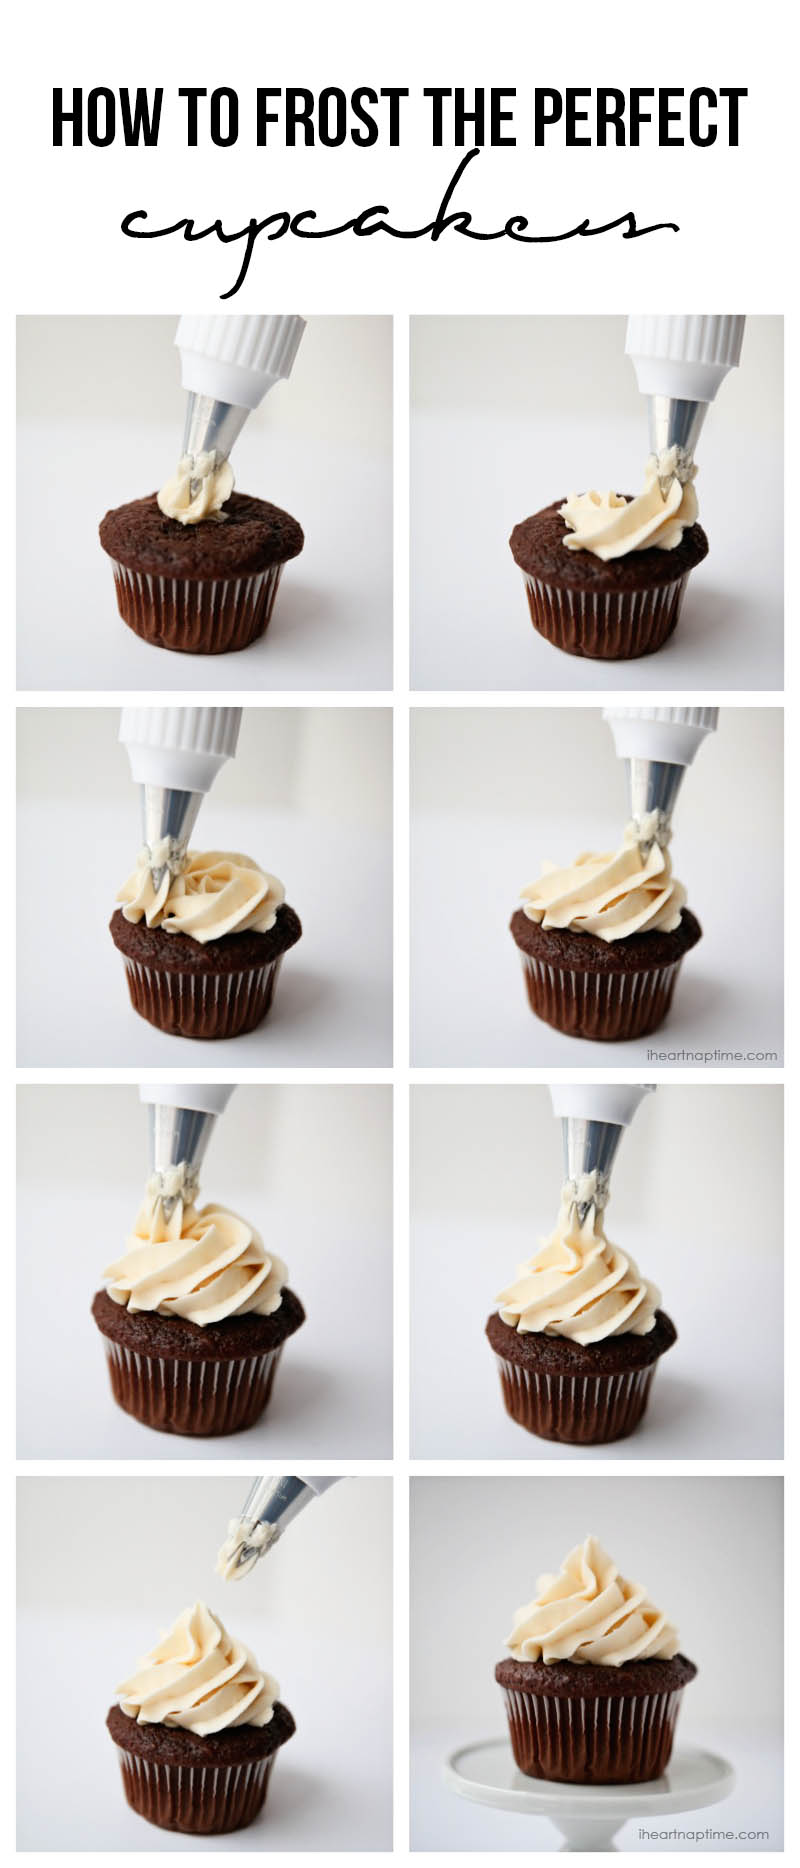 How to Frost Cupcakes Like a Professional